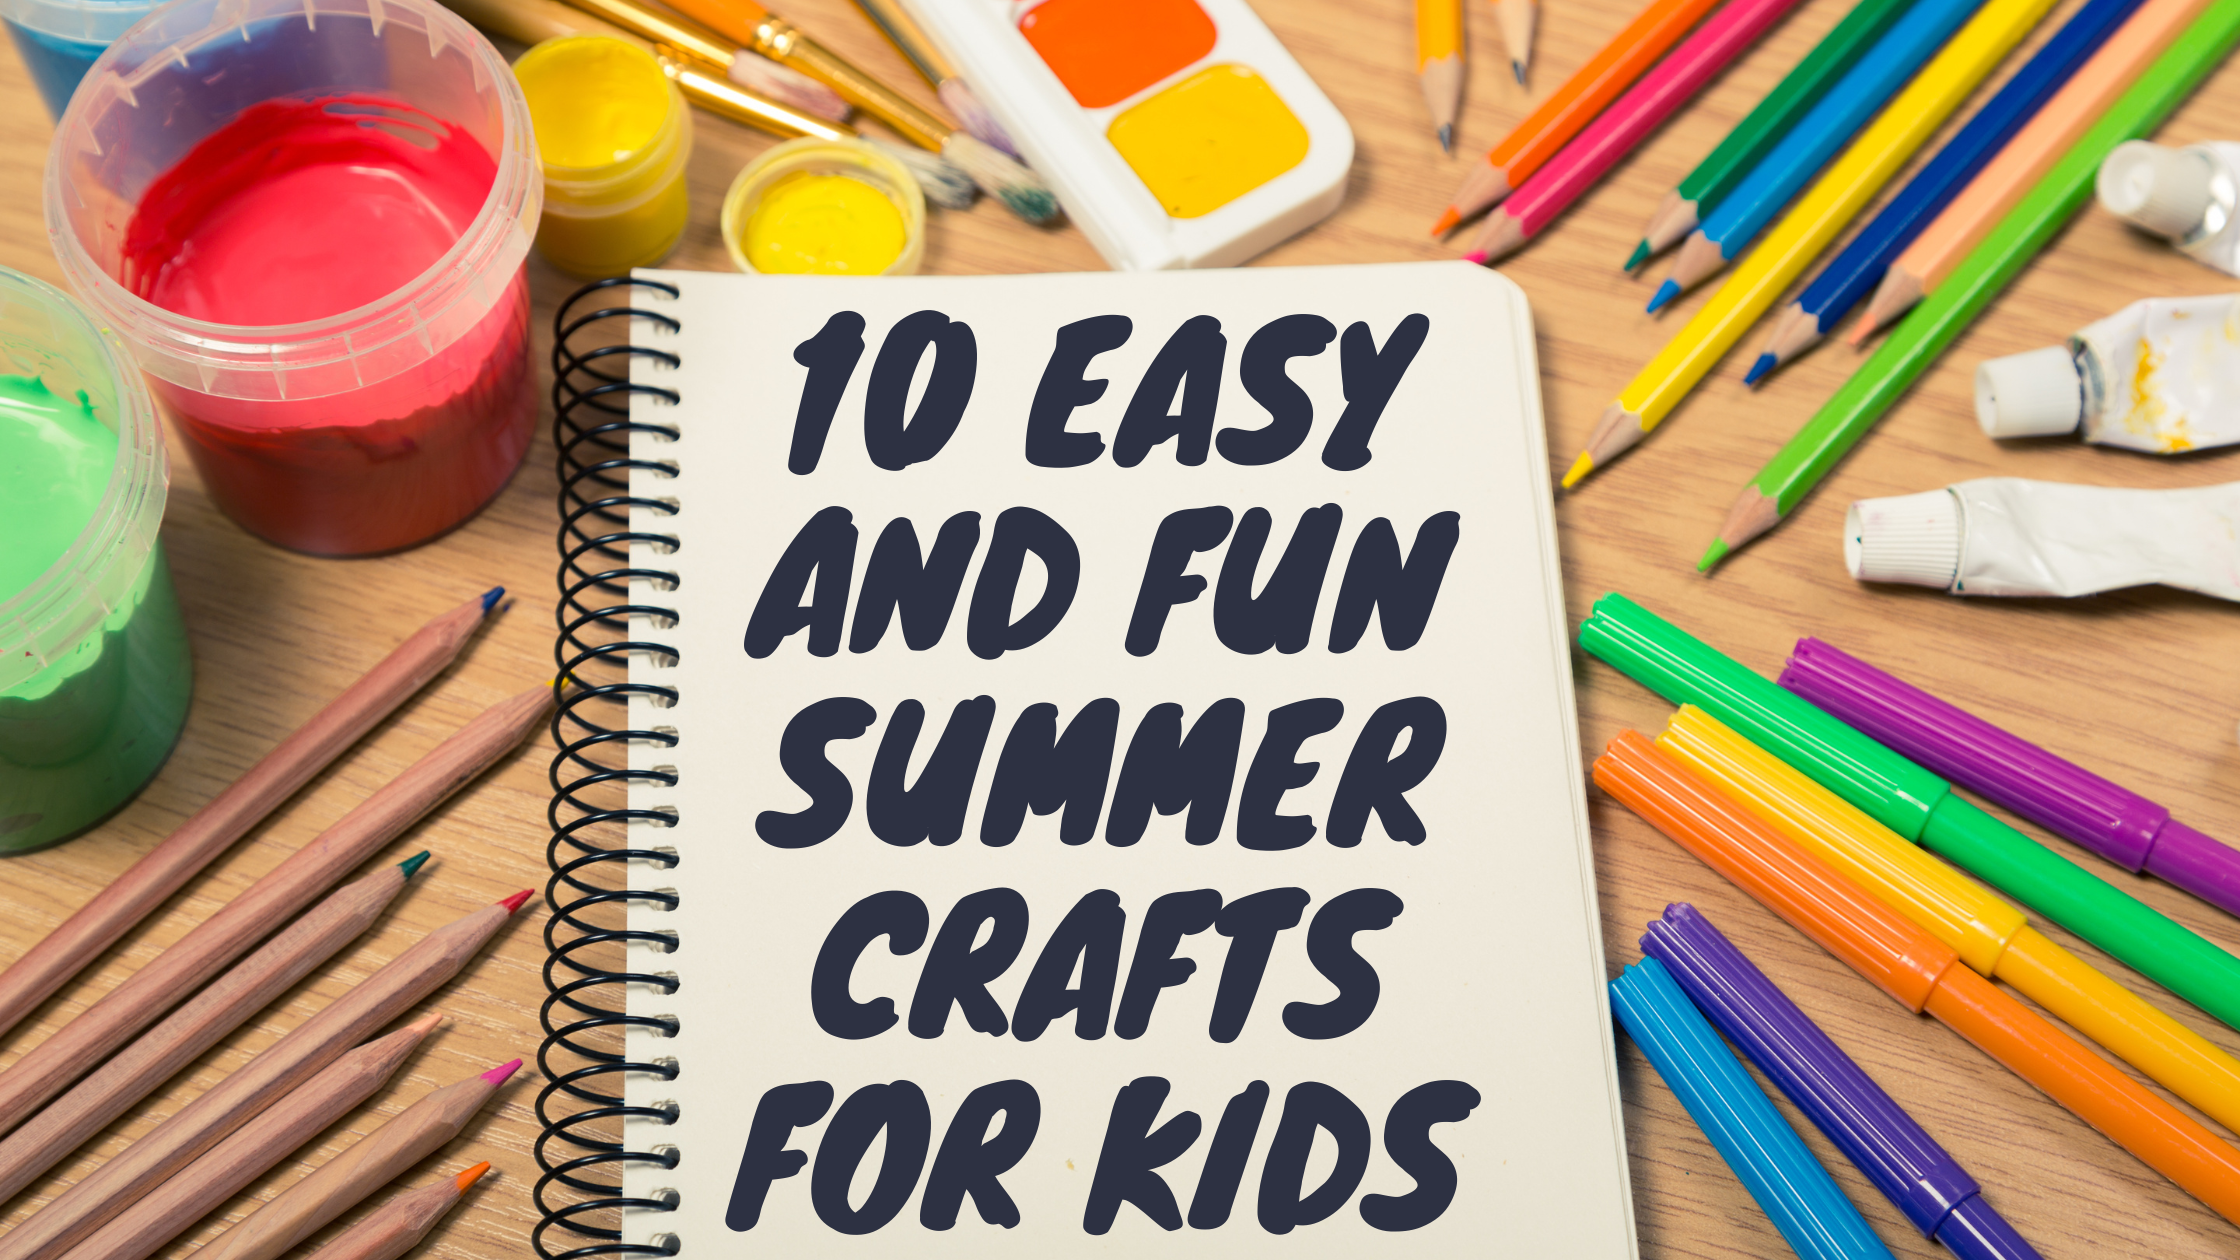 10 Easy and Fun Summer Crafts for Kids